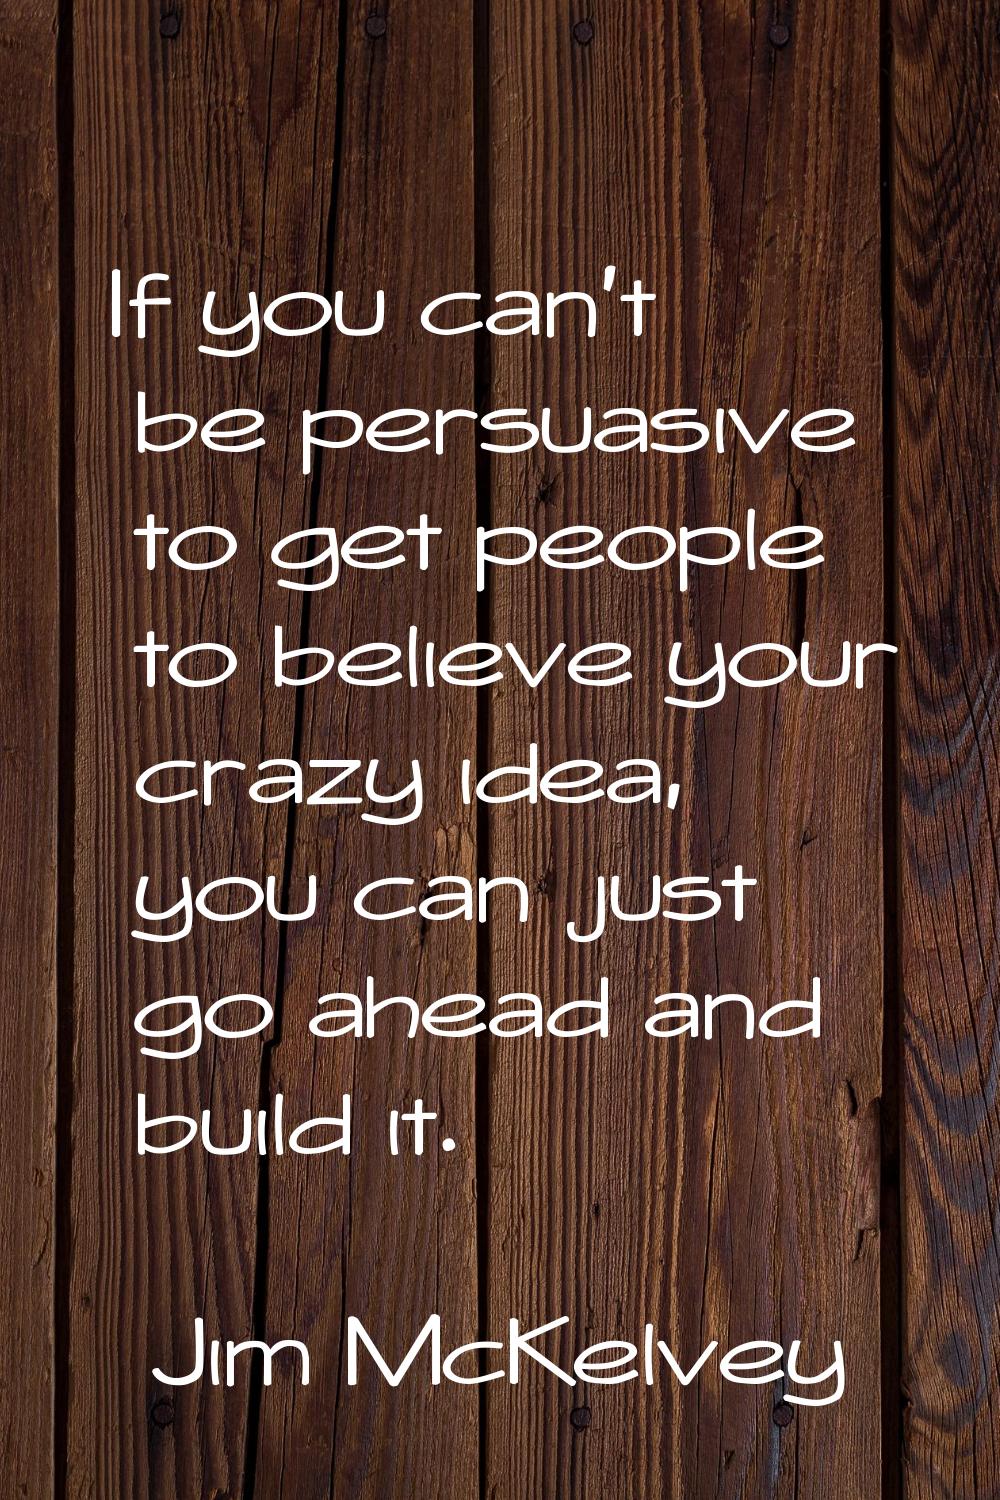 If you can't be persuasive to get people to believe your crazy idea, you can just go ahead and buil